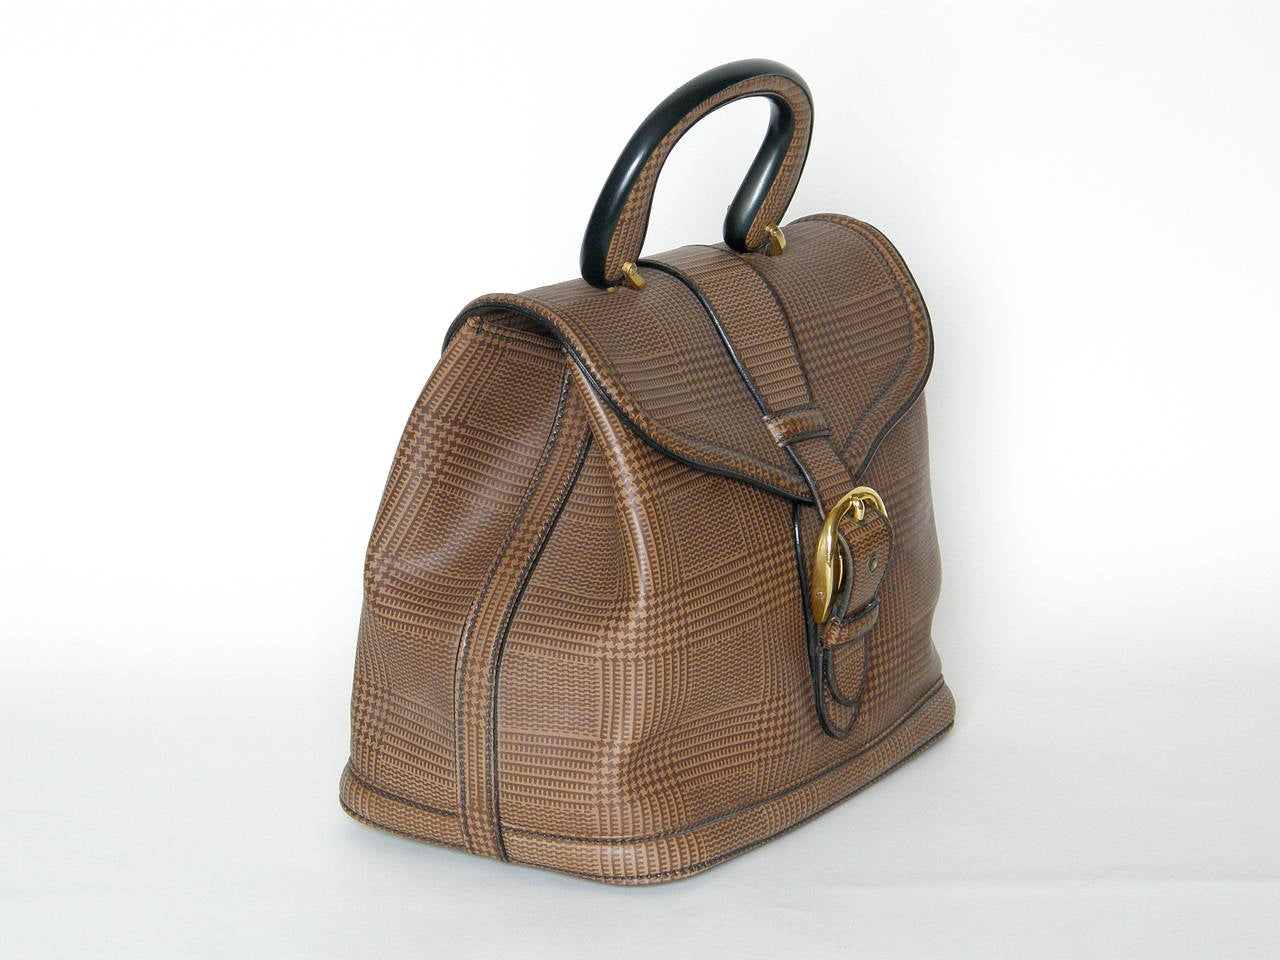 Oversized Italian leather handbag with a printed plaid pattern. This roomy bag has a flap top with a rigid handle and a locking, gold-plated buckle clasp. The suede lined interior has one zippered and two slip pockets, one with a matching suede coin